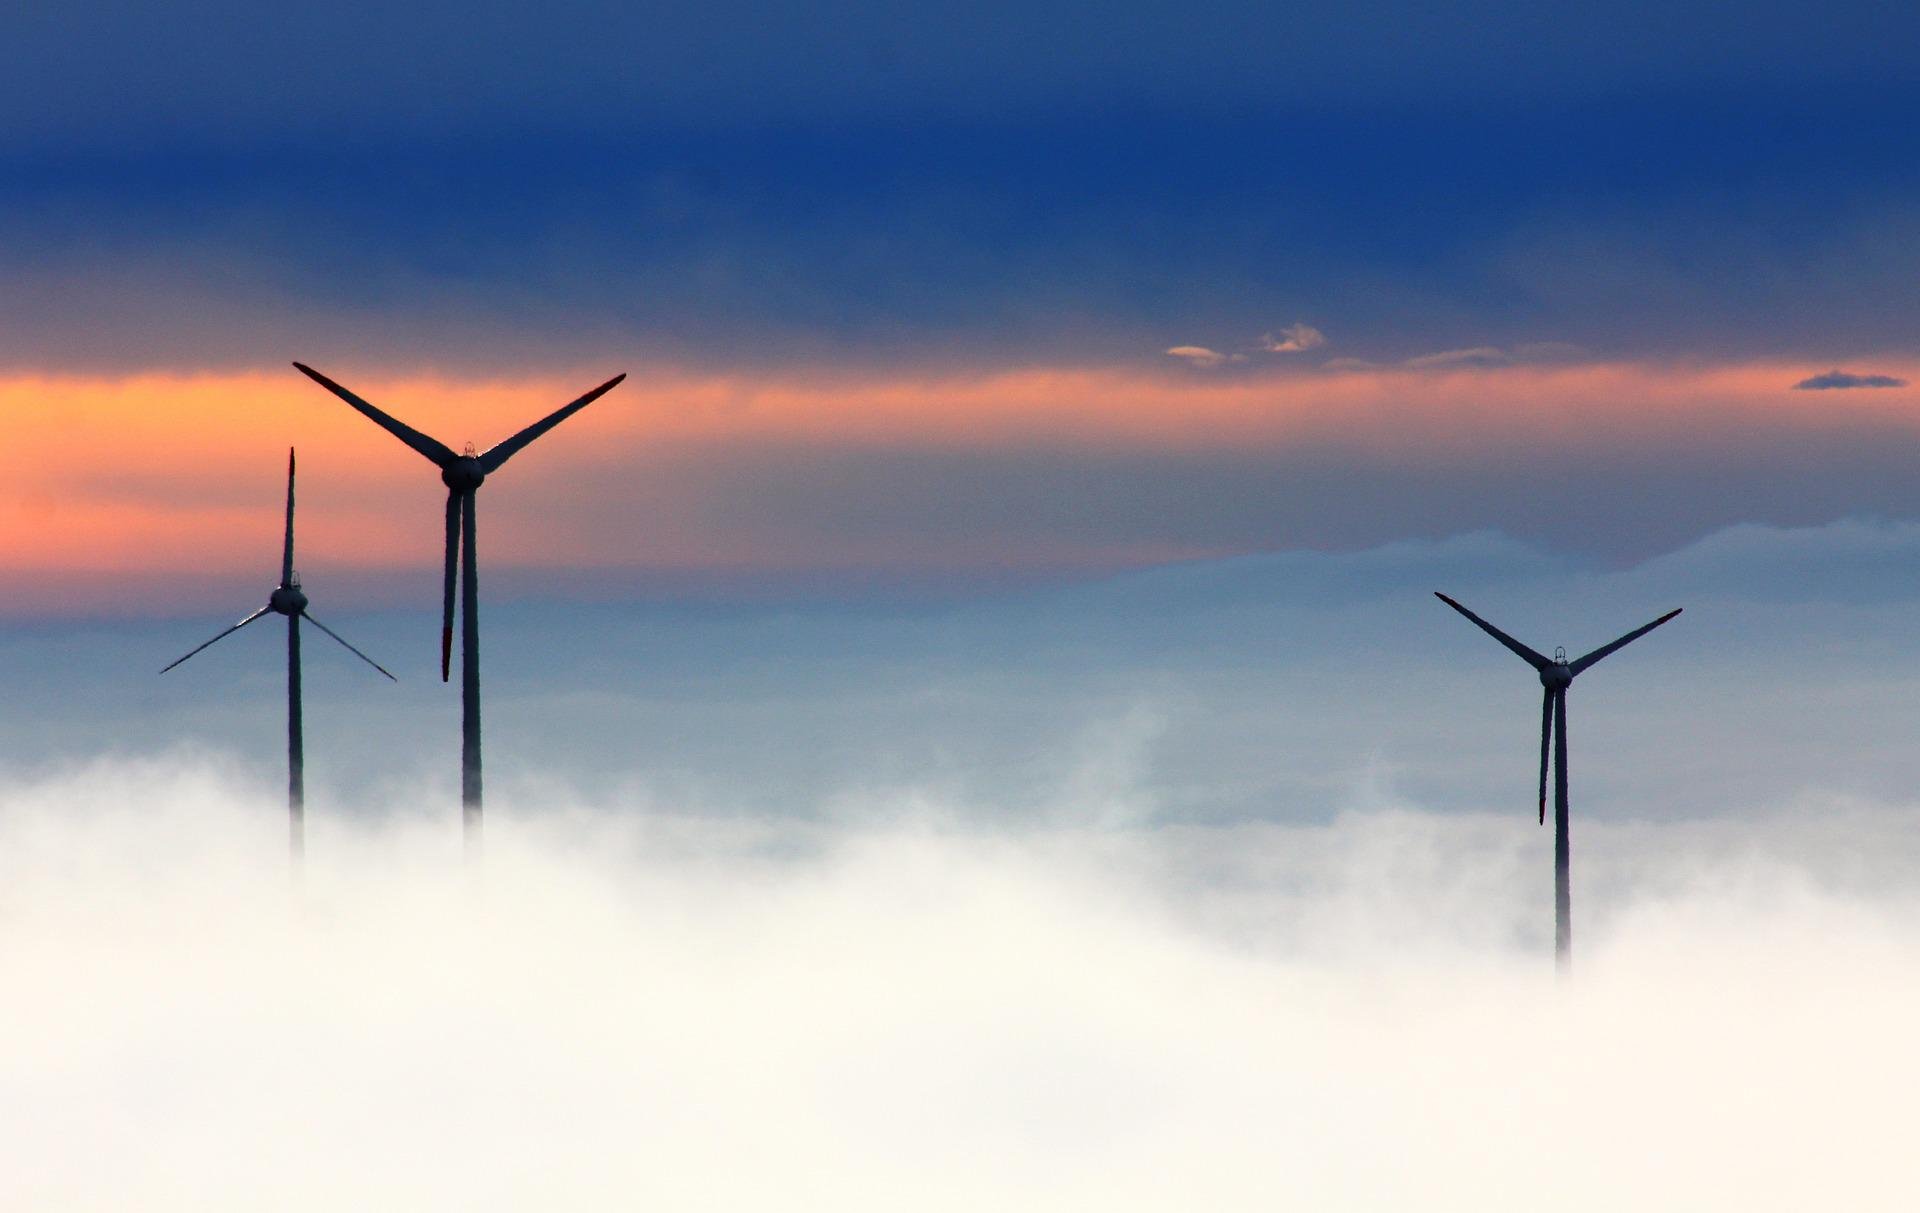 three windmills in the clouds